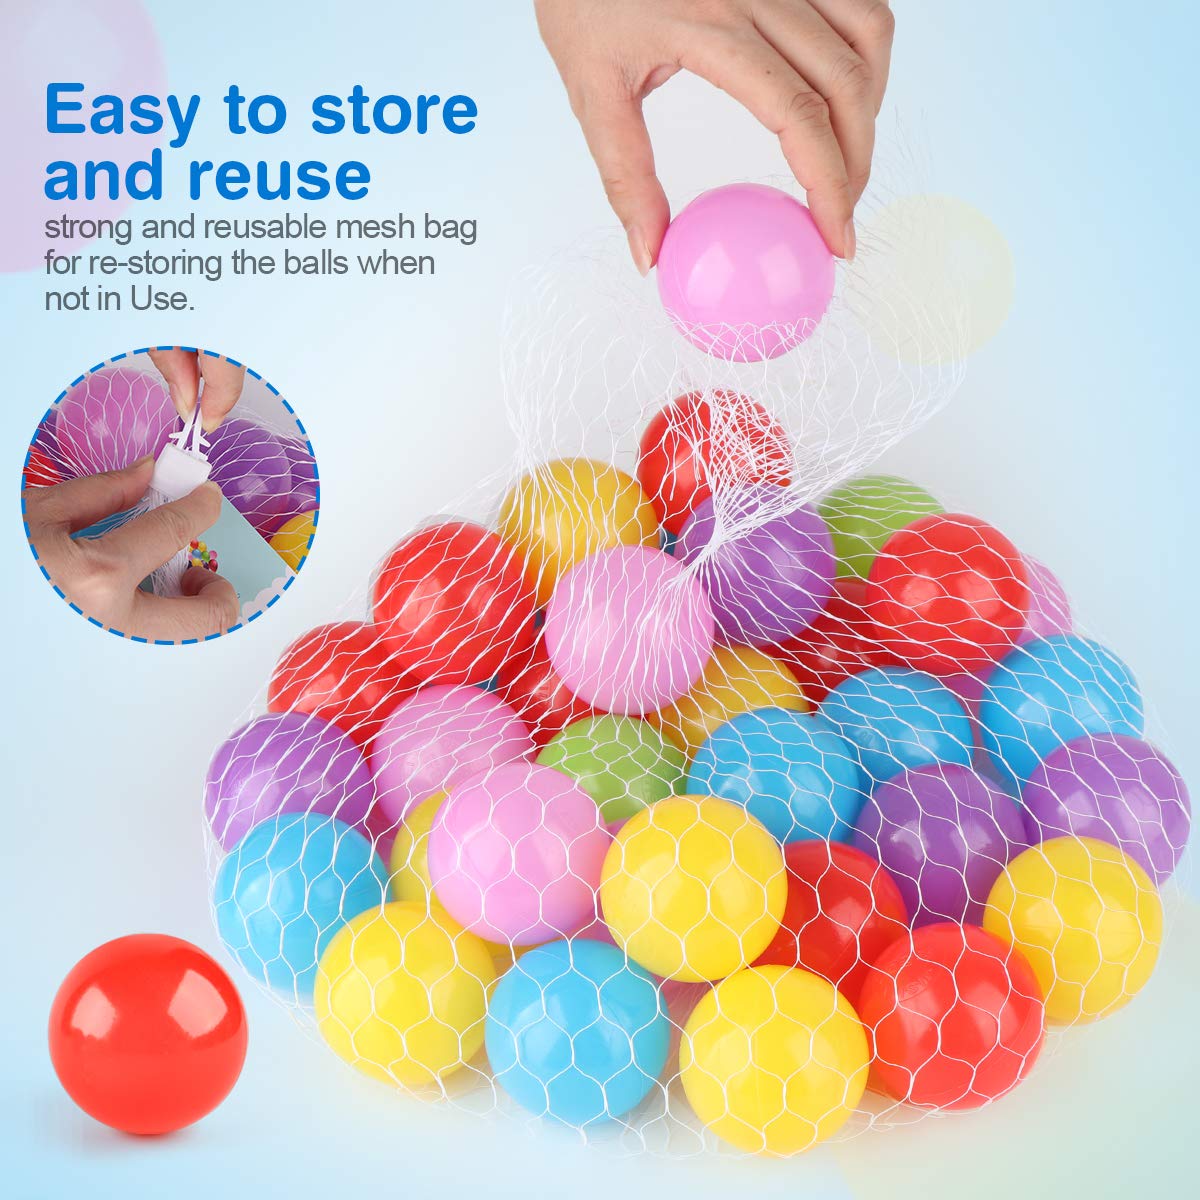 Coogam Pit Balls Pack of 50 - BPA Free 6 Color Hollow Soft Plastic Ball for Kids Birthday Pool Tent Party Favors Summer Water Bath Toy (6CM)